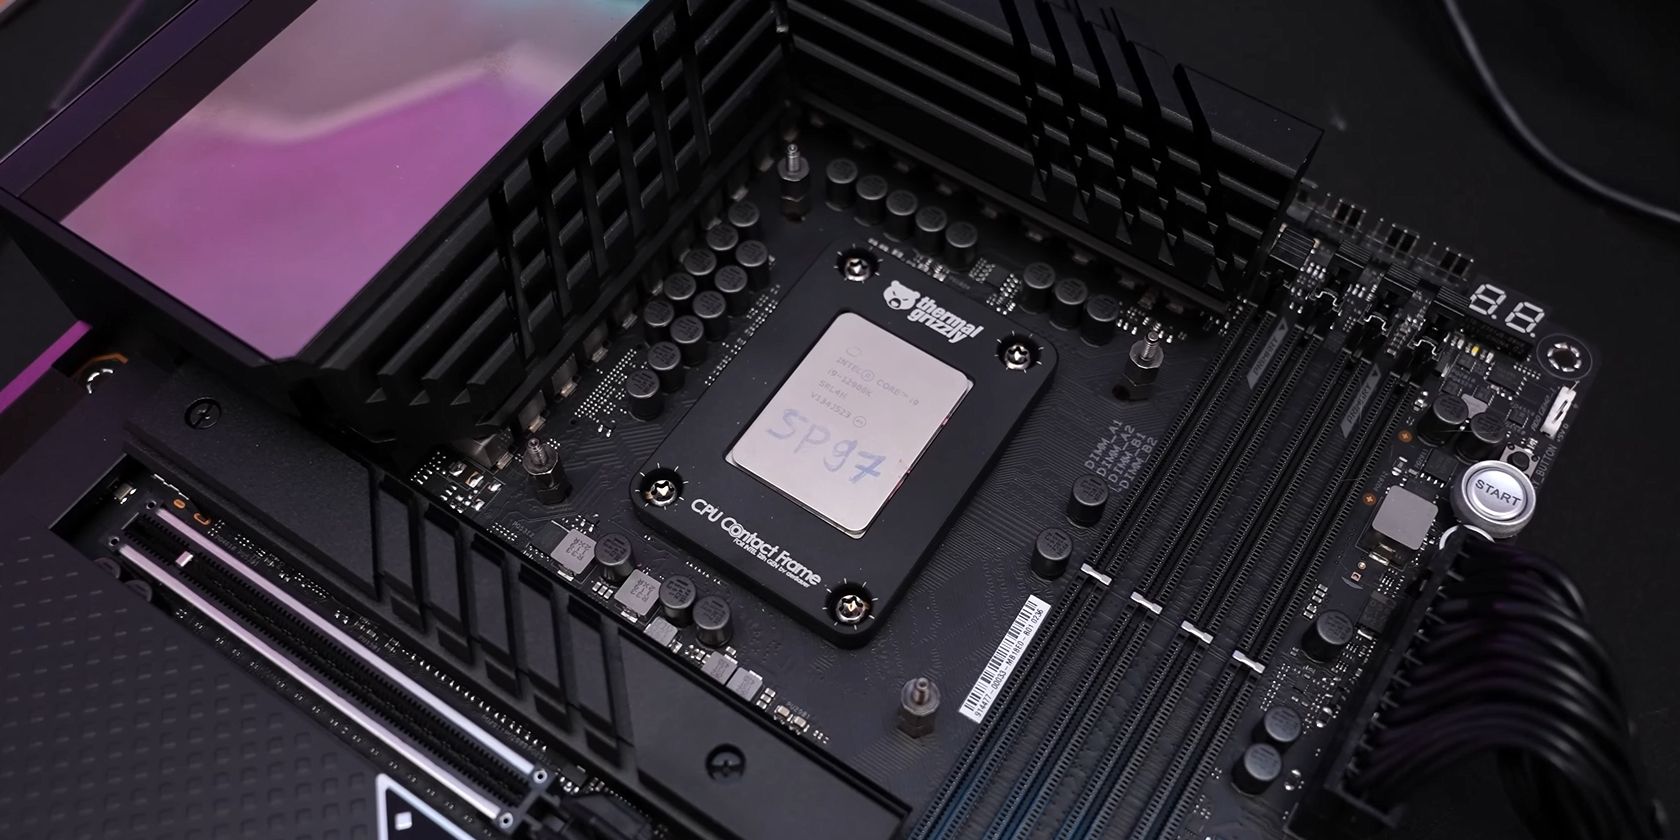 Intel Core i9 12900K mounted on an LGA 1700 Socket with Thermal Grizzly's Anti-Bend Frame